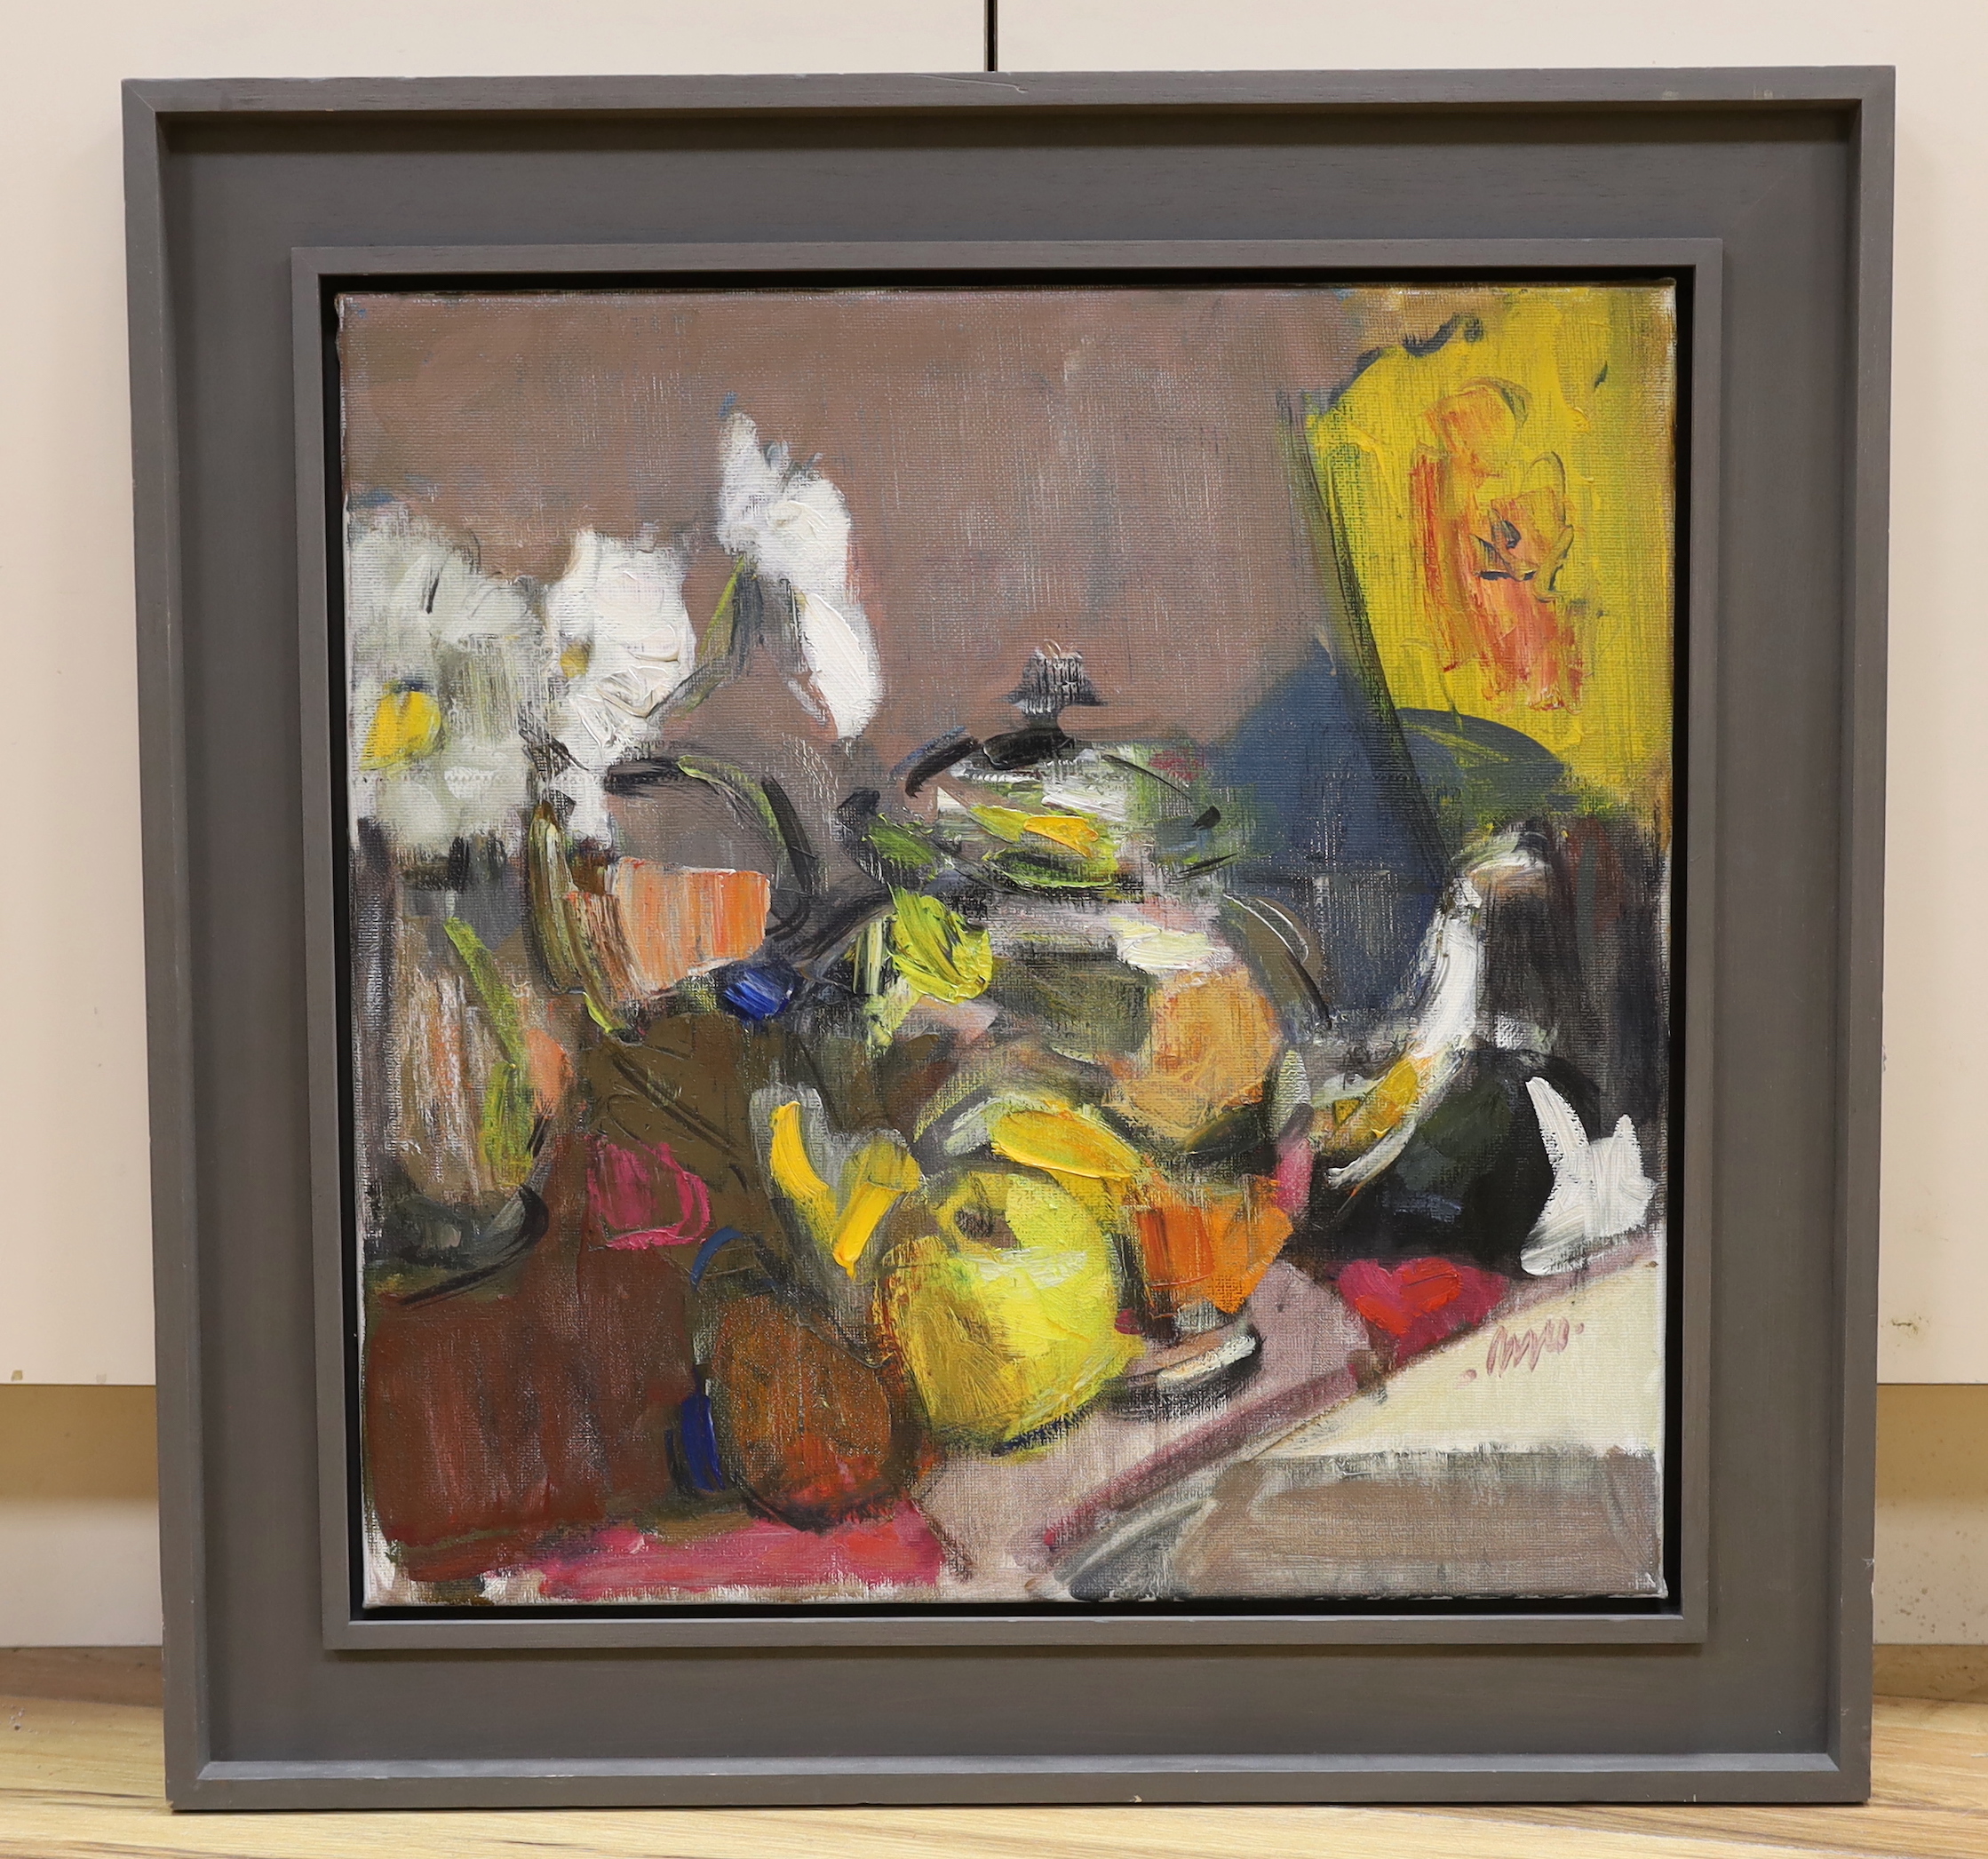 Gordon Bryce (b.1943), impressionist oil on canvas, Still life of silver teapot and yellow fan, signed, details and label verso, 51 x 50cm